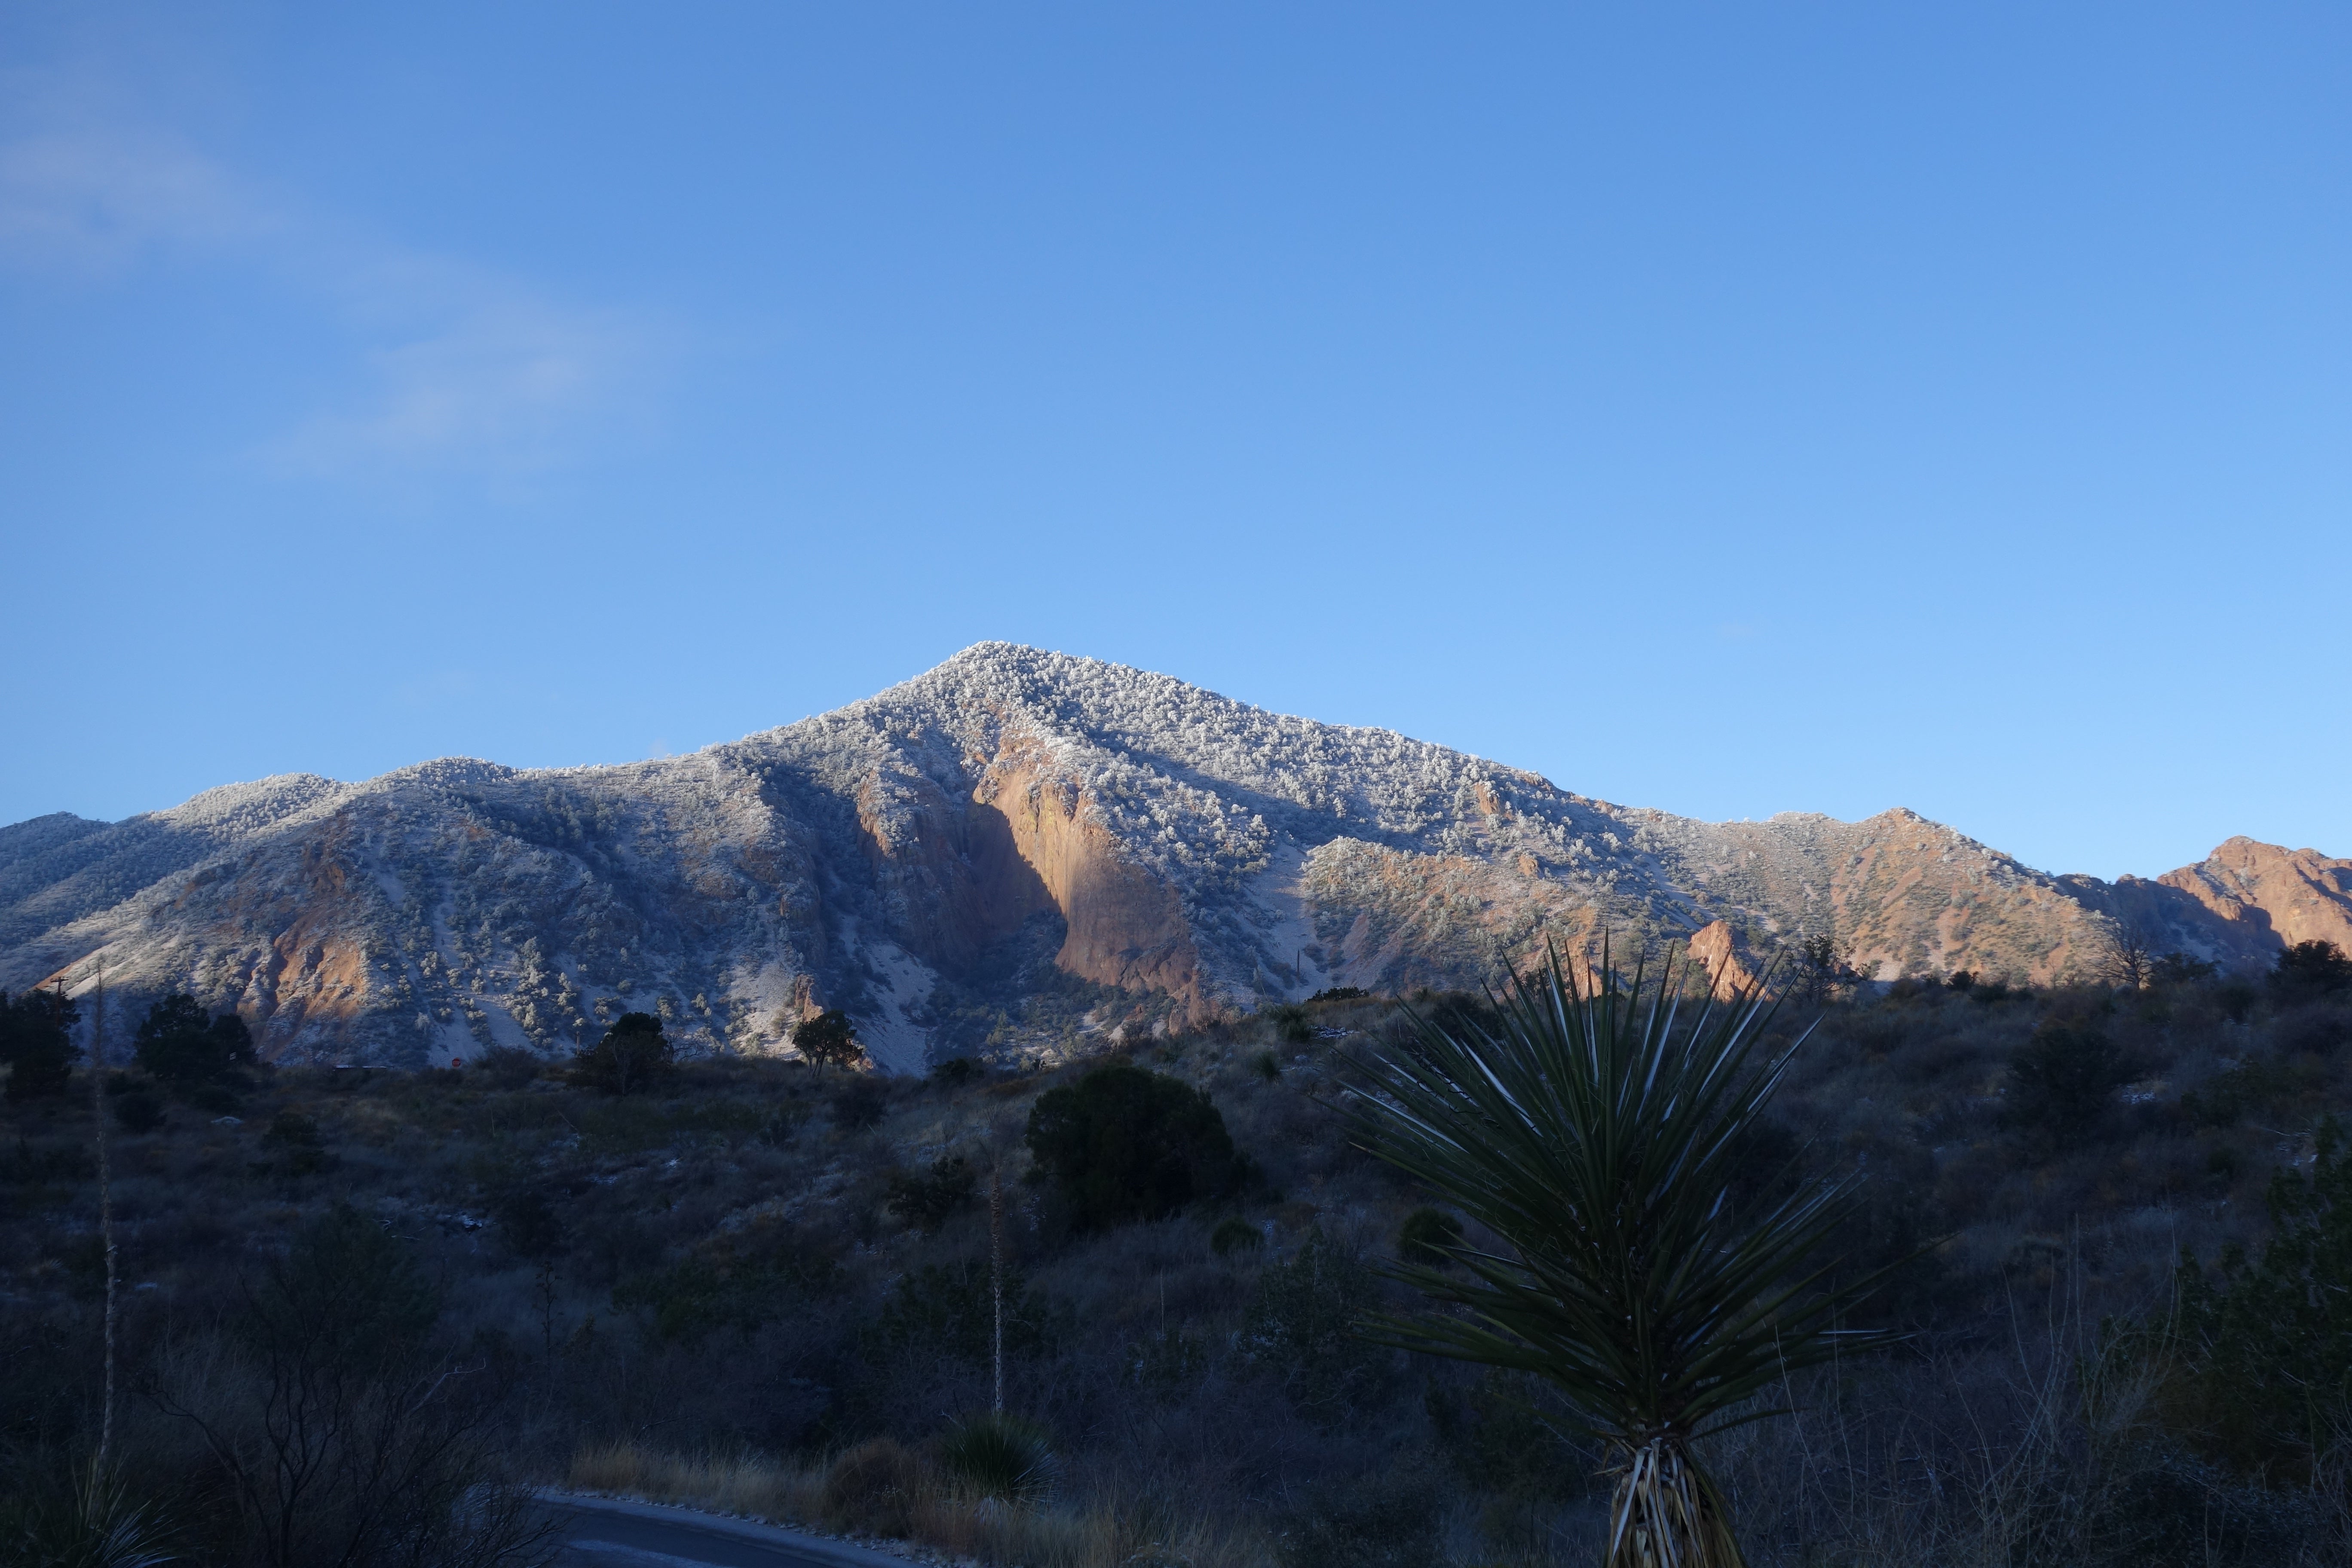 Camper submitted image from Chisos Basin Campground — Big Bend National Park - 1